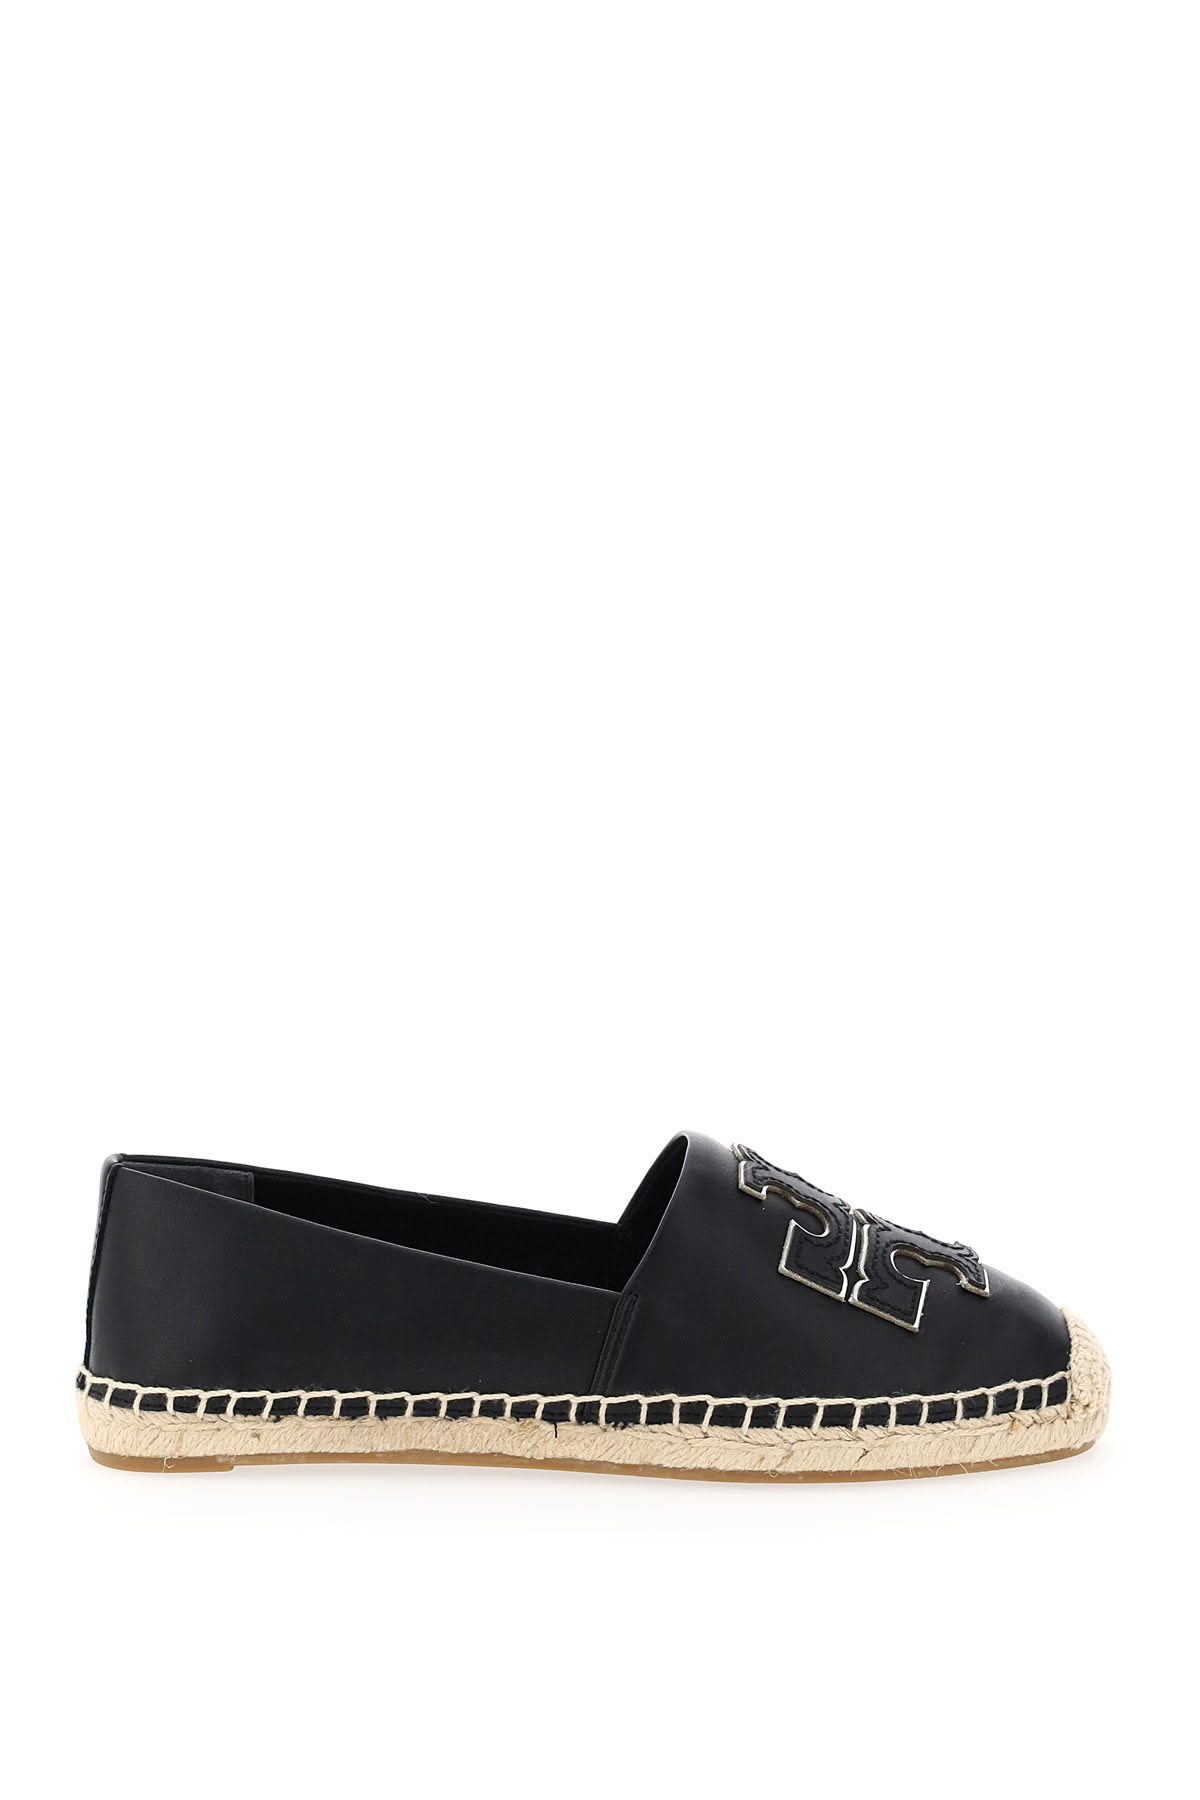 Tory Burch Ines Leather Espadrilles